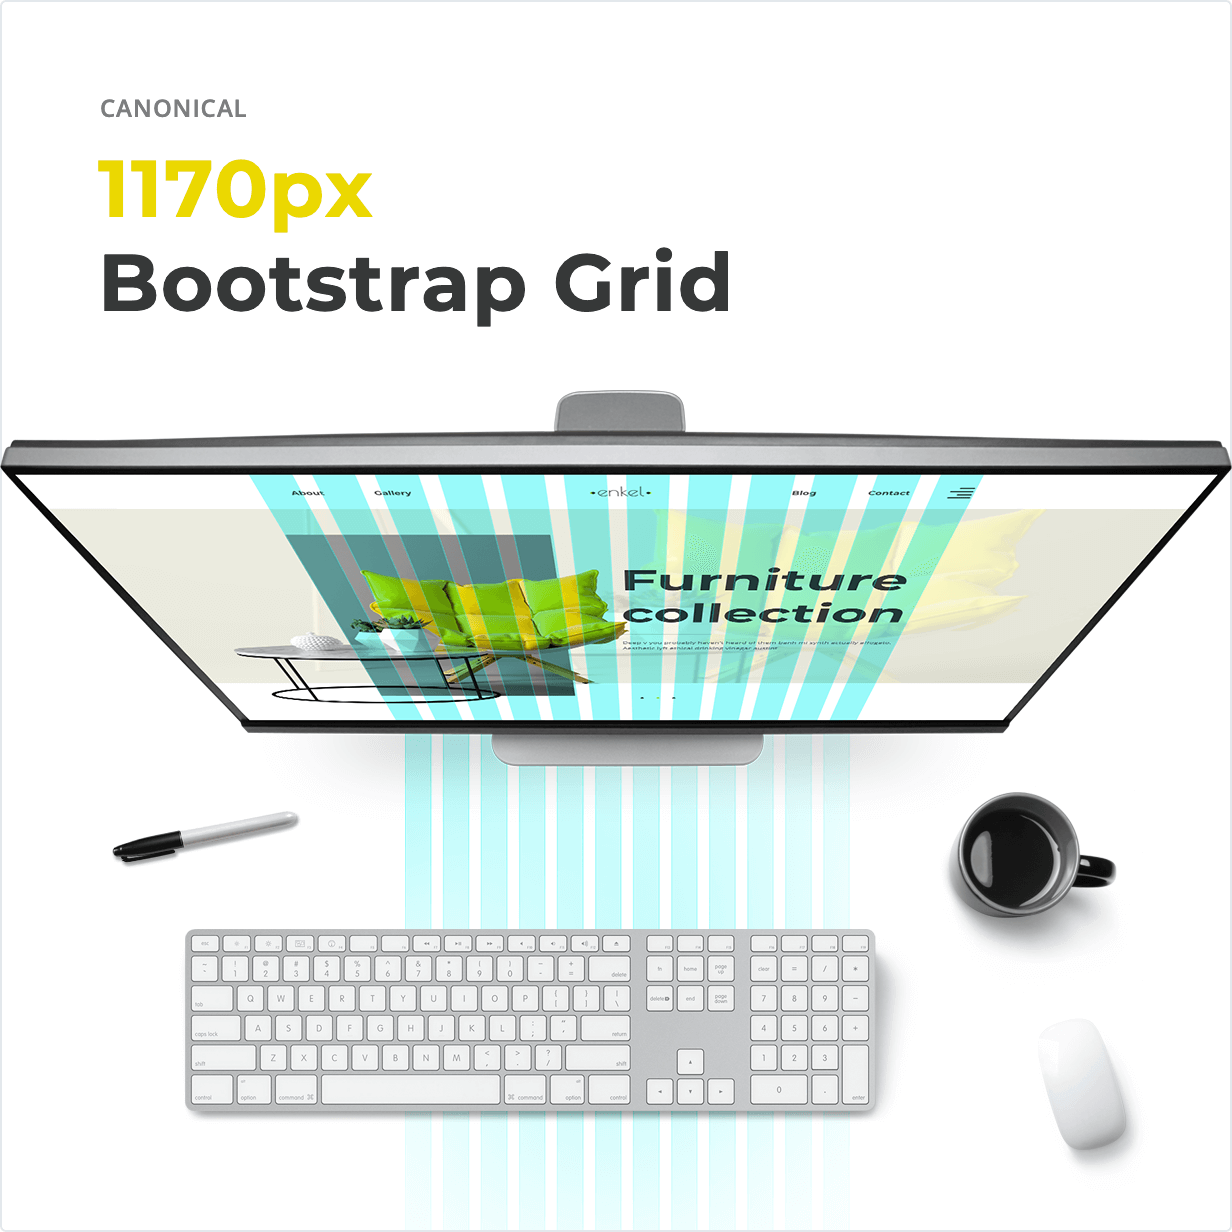 1170px Bootstrap Grid